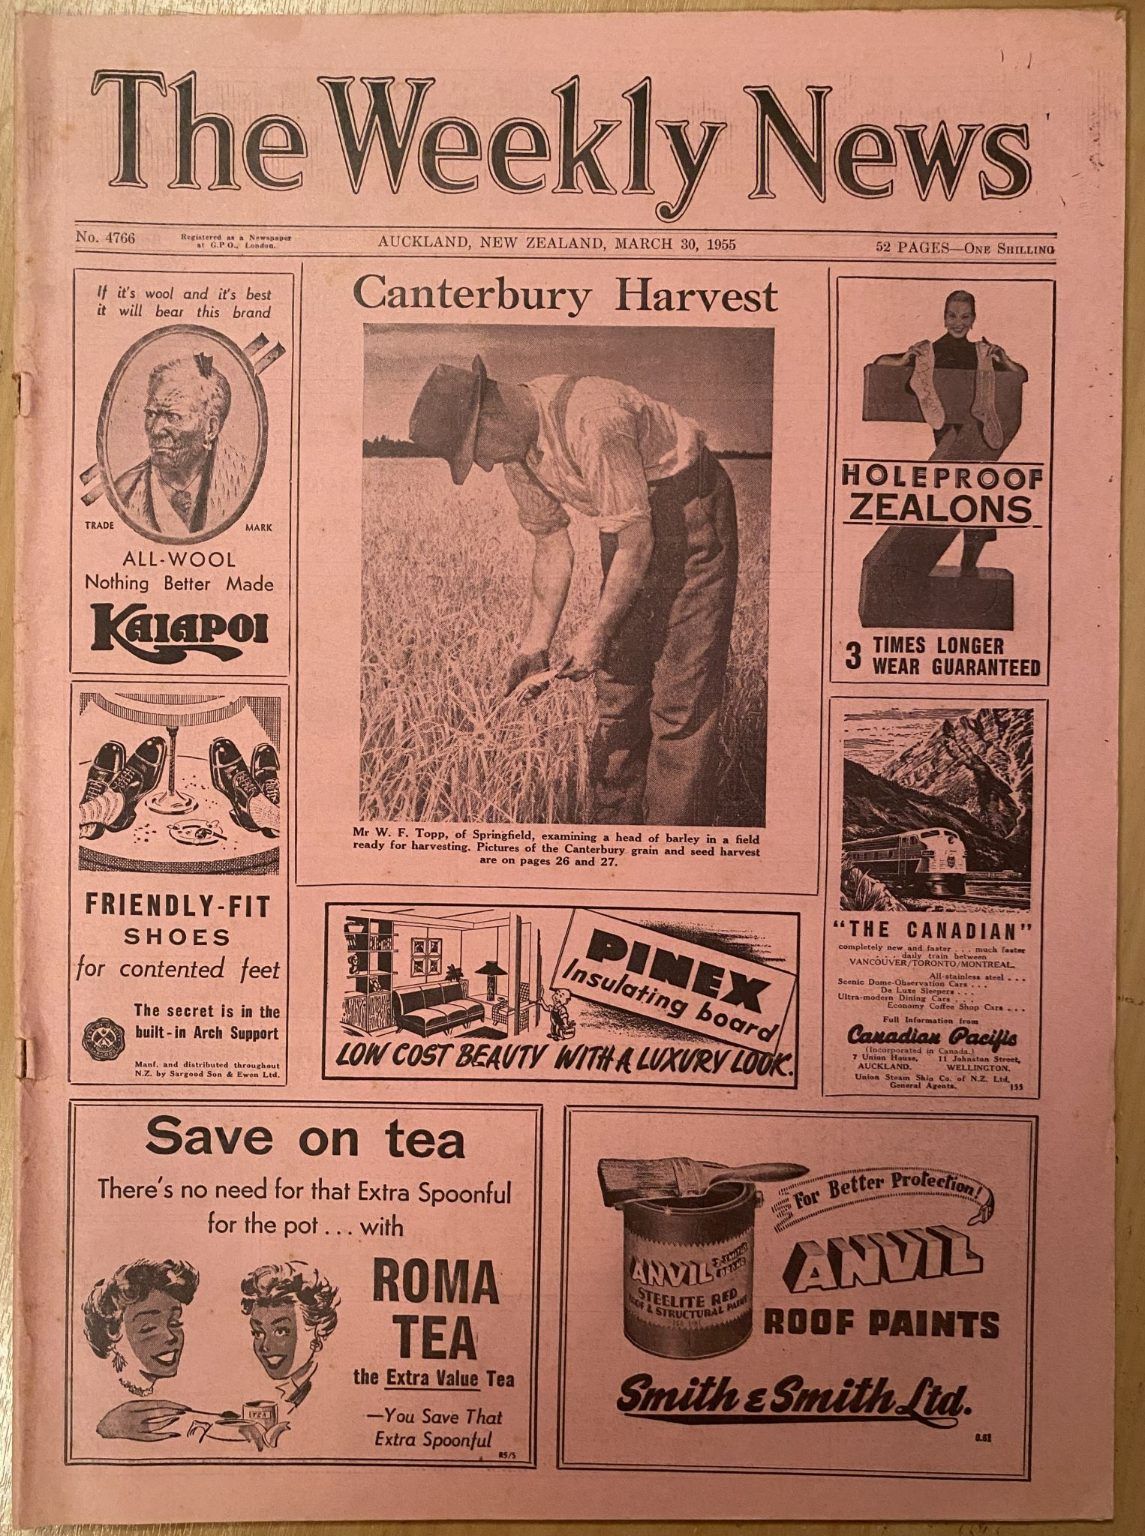 OLD NEWSPAPER: The Weekly News - No. 4766, 30 March 1955